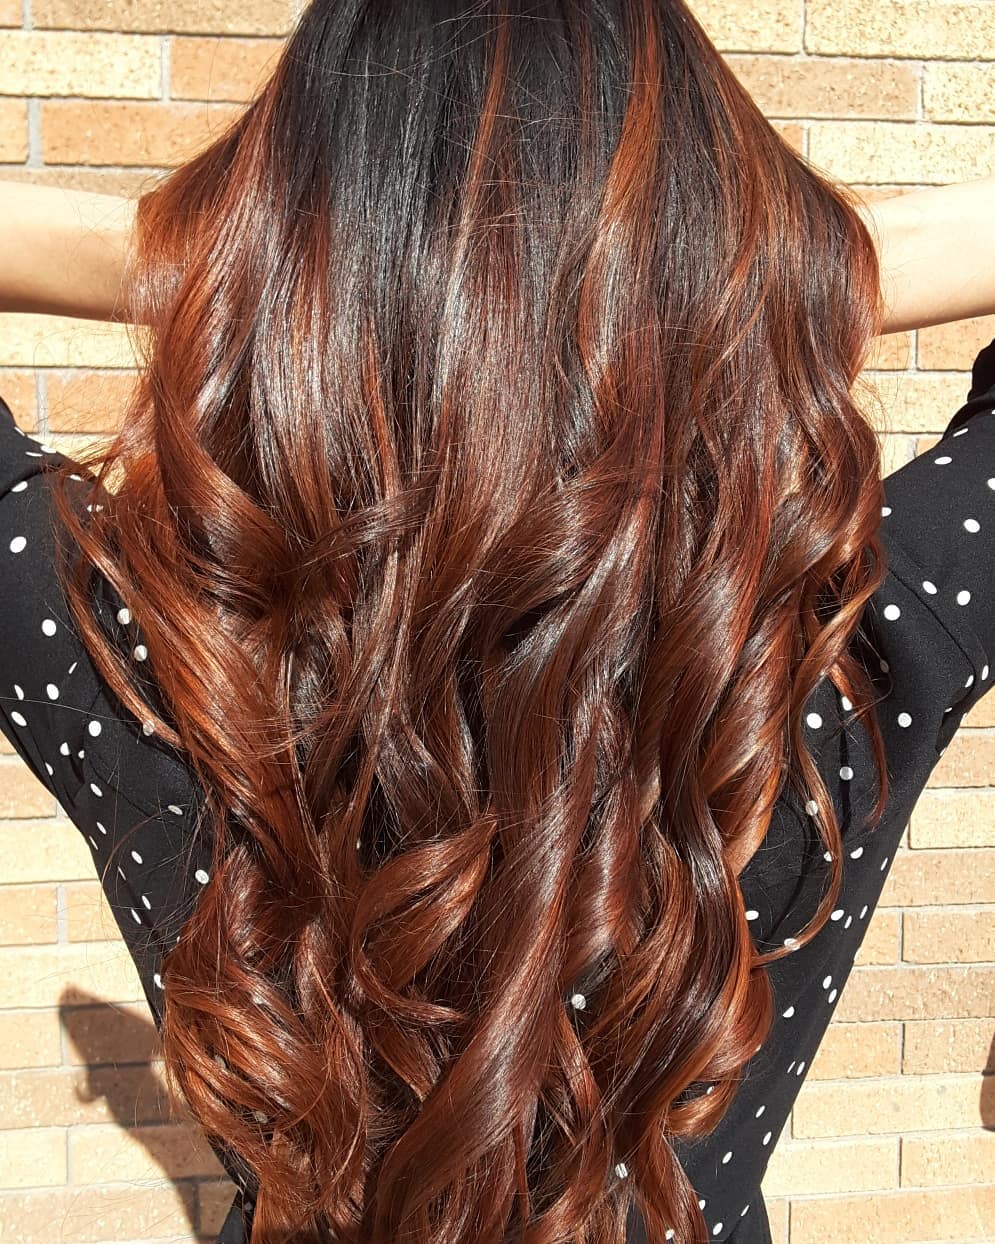 Ombre Balayage Hair Highlights - Hair By Nassi